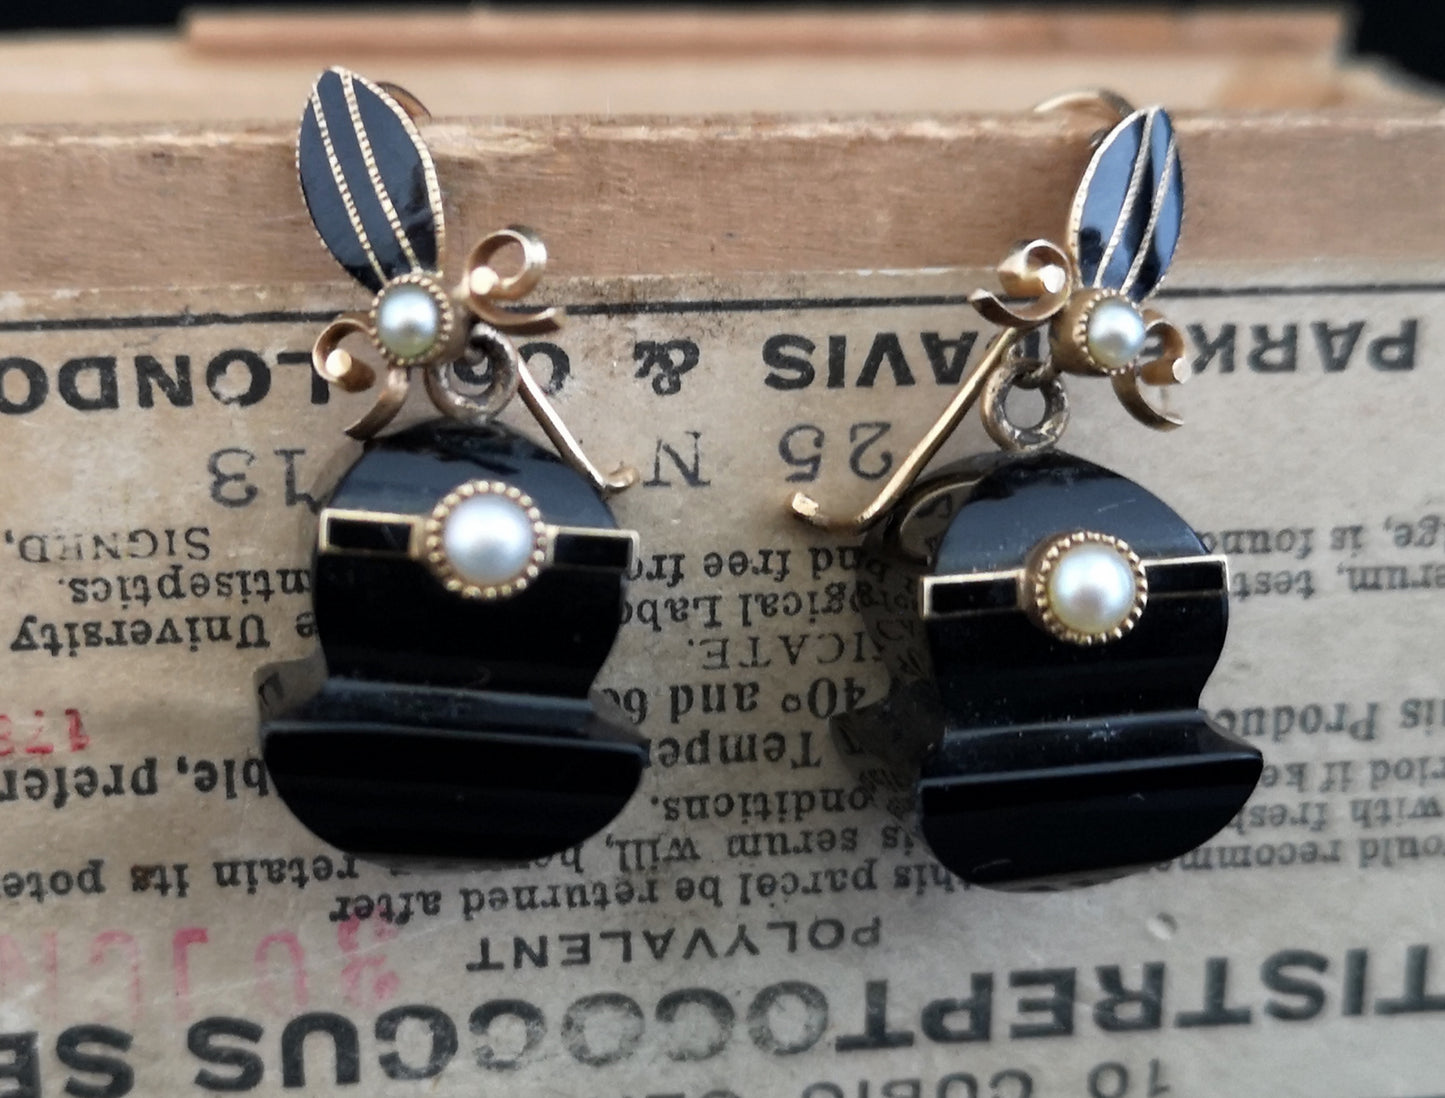 Victorian Onyx, Pearl and Gold earrings, mourning